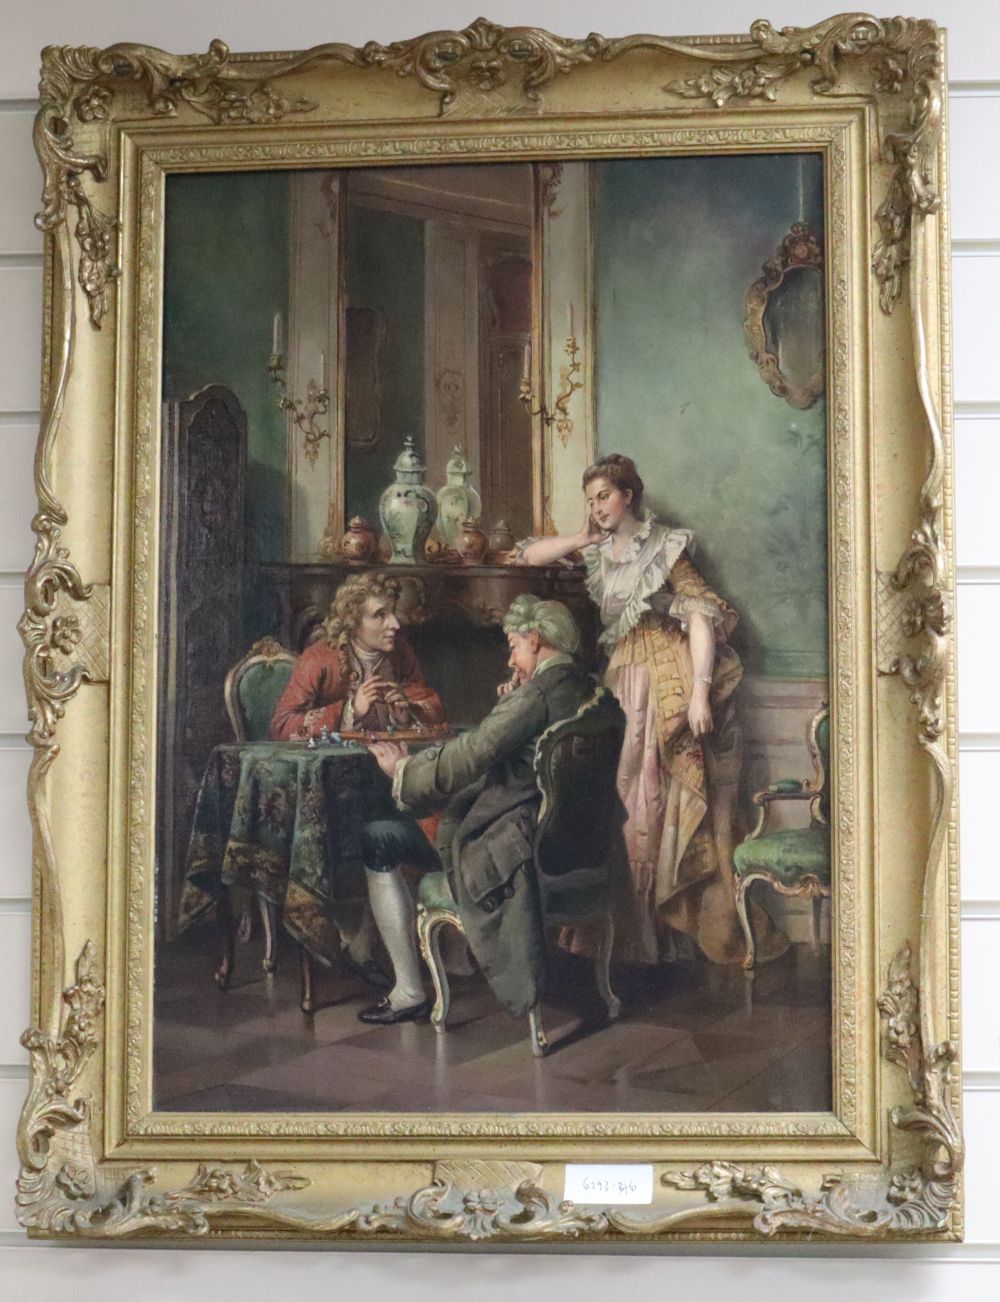 Late 19th century Continental School, oil on canvas, The Chess Match, 57 x 40cm